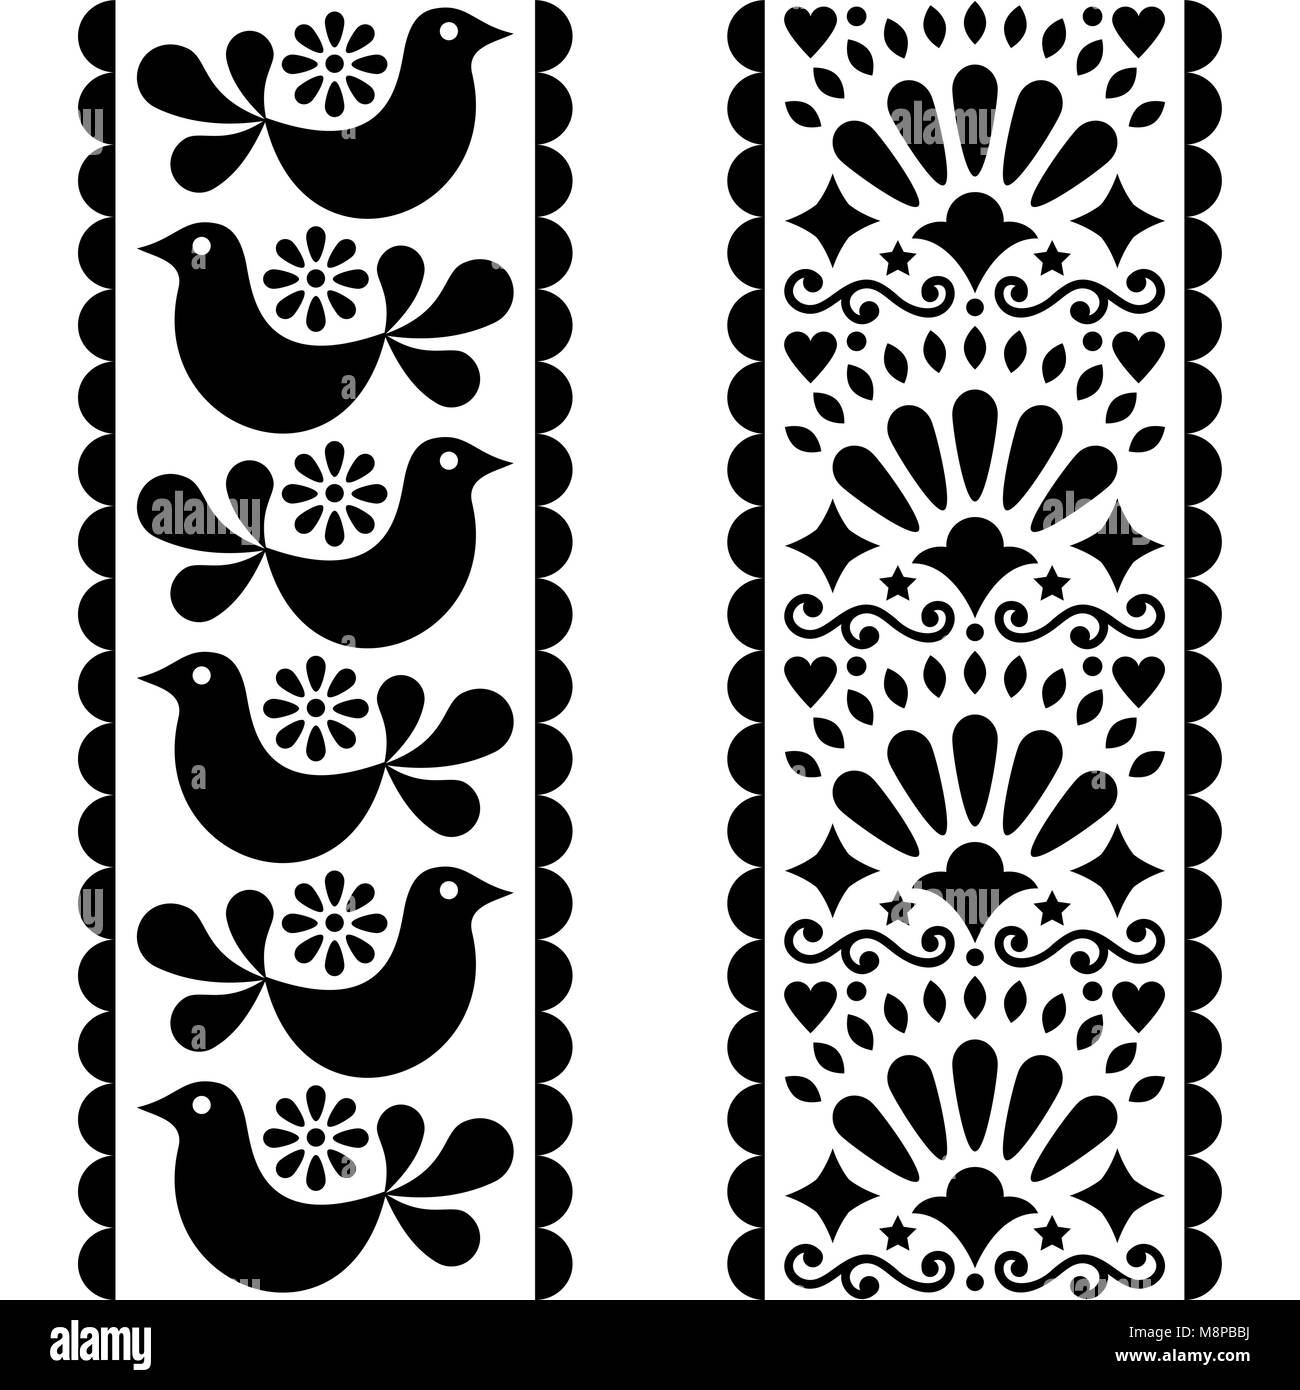 Folk art seamless pattern - Mexican style long stripes design with birds and flowers in black and white Stock Vector